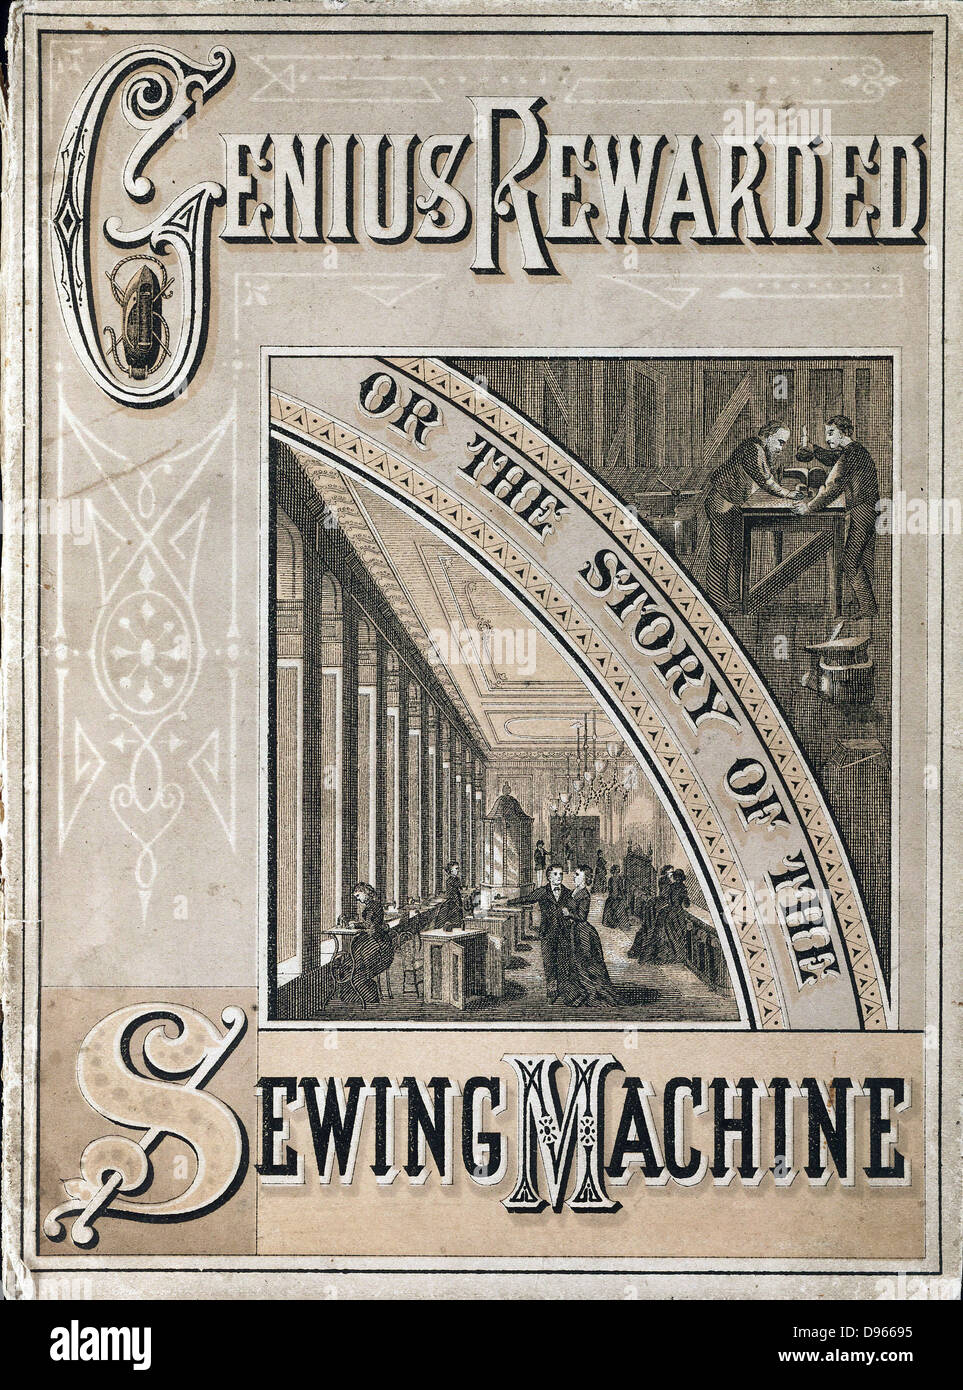 Isaac Merritt Singer (1811-1875) American inventor and manufacturer. Cover of booklet on the Singer sewing machine published New York c.1880, showing Singer working on his invention (top) and a Singer sewing machine factory (bottom). From 'Genius Rewarded Stock Photo